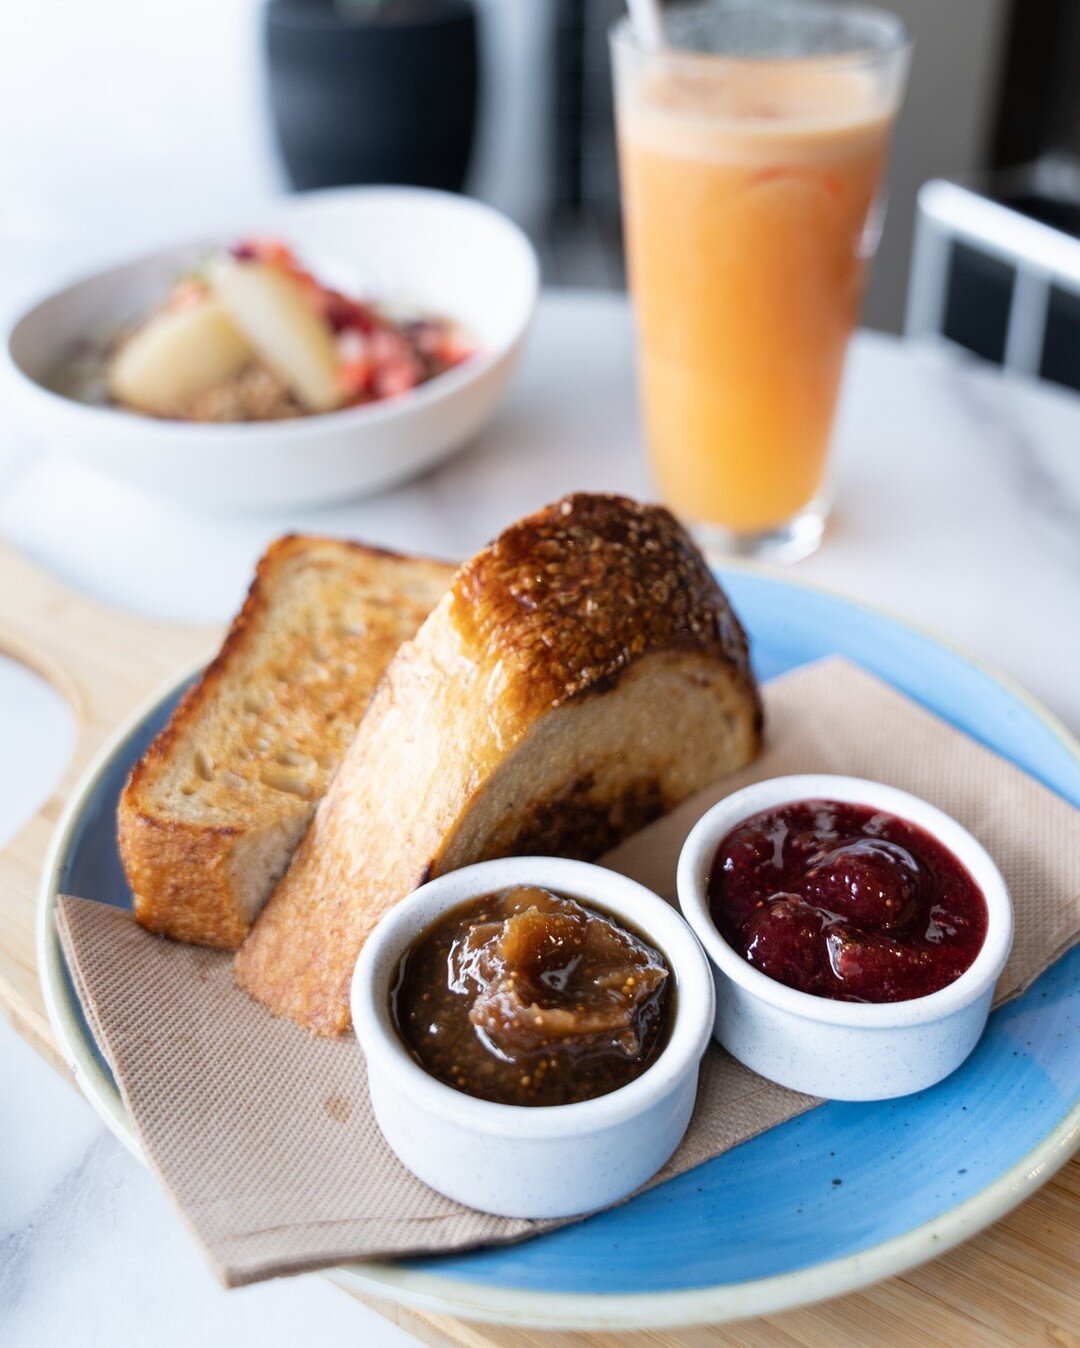 Sometimes you just can't beat the simplicity of a delicious slice of toast with our house-made jam. With freshly-baked local bread toasted to golden-brown perfection, what's not to love?⠀⠀⠀⠀⠀⠀⠀⠀⠀
.⠀⠀⠀⠀⠀⠀⠀⠀⠀
.⠀⠀⠀⠀⠀⠀⠀⠀⠀
.⠀⠀⠀⠀⠀⠀⠀⠀⠀
.#sydneycafe #sydneye